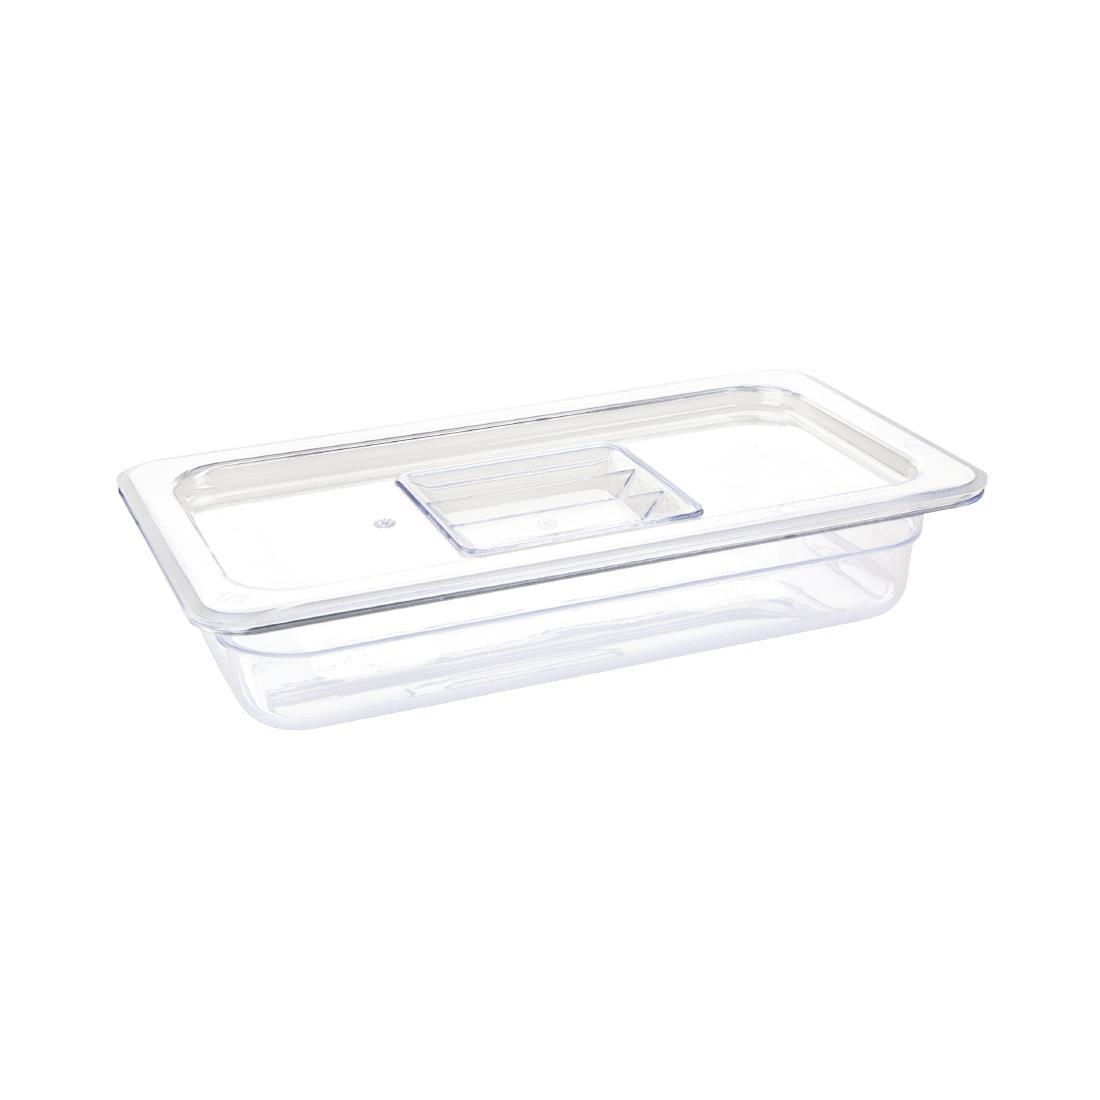 Vogue Polycarbonate 1/3 Gastronorm Container 65mm Clear - U232  - 2